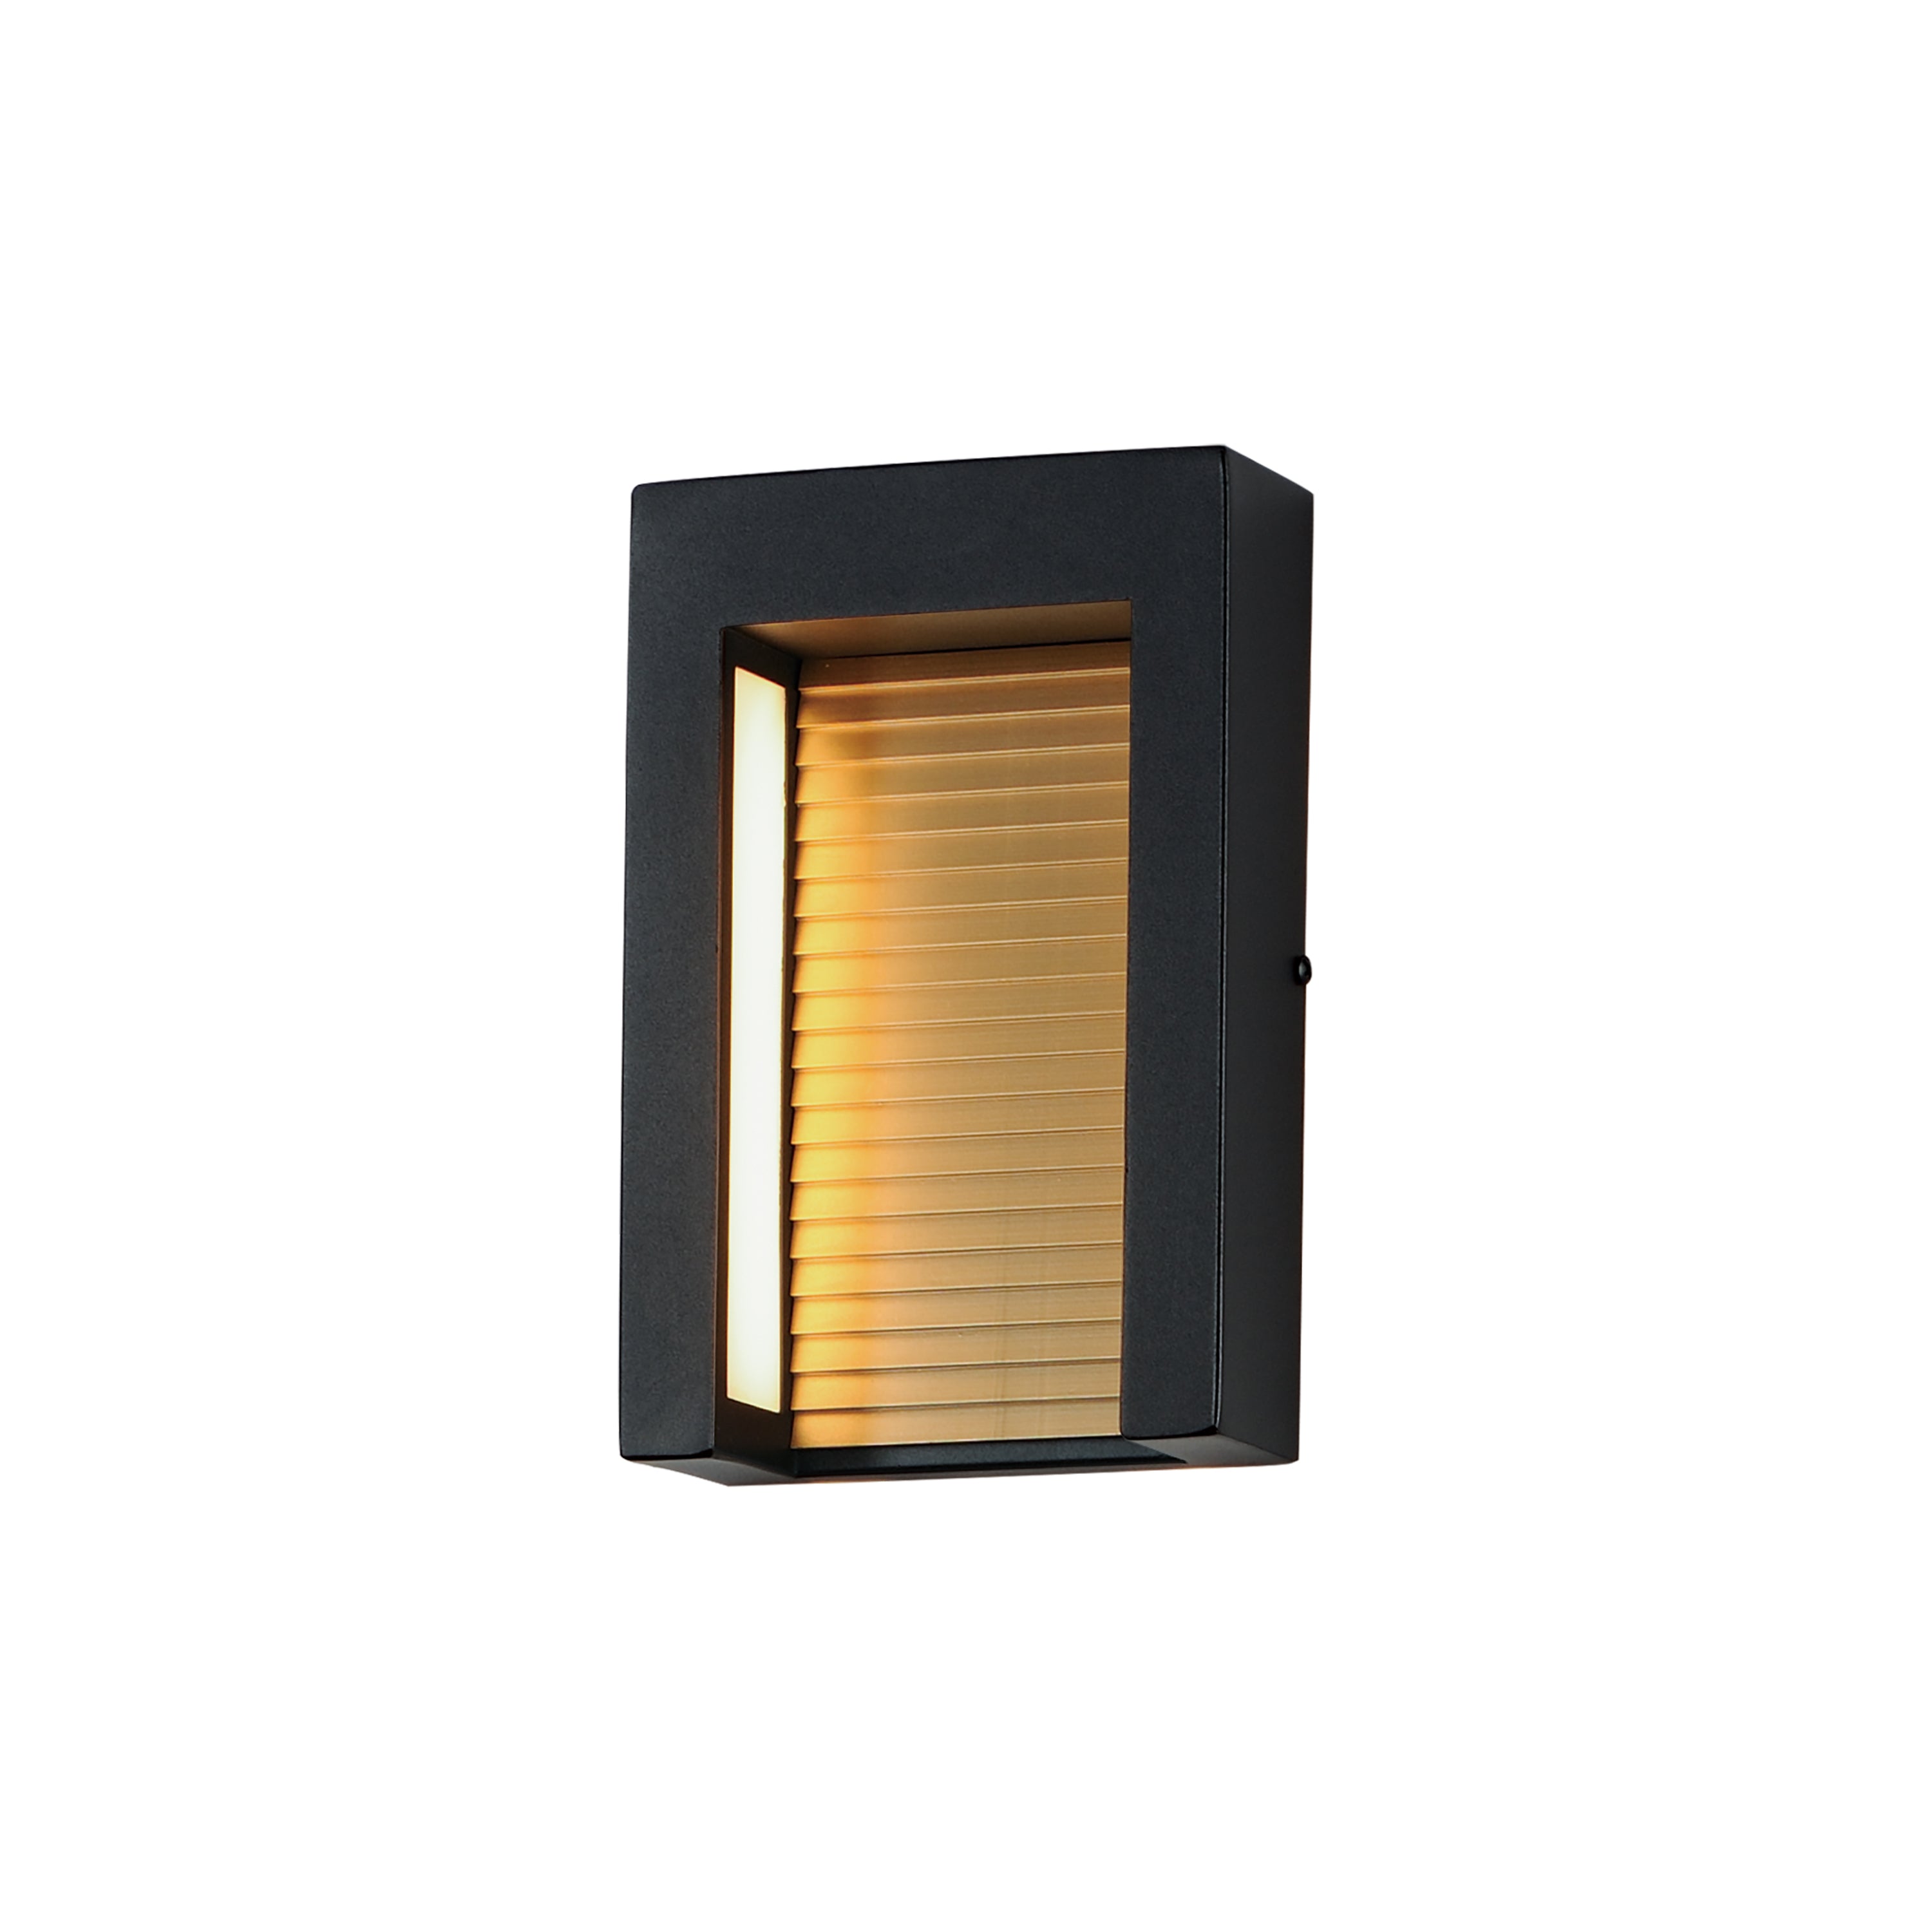 ALCOVE Outdoor wall sconce Black, Gold INTEGRATED LED - E30102-BKGLD | MAXIM/ET3